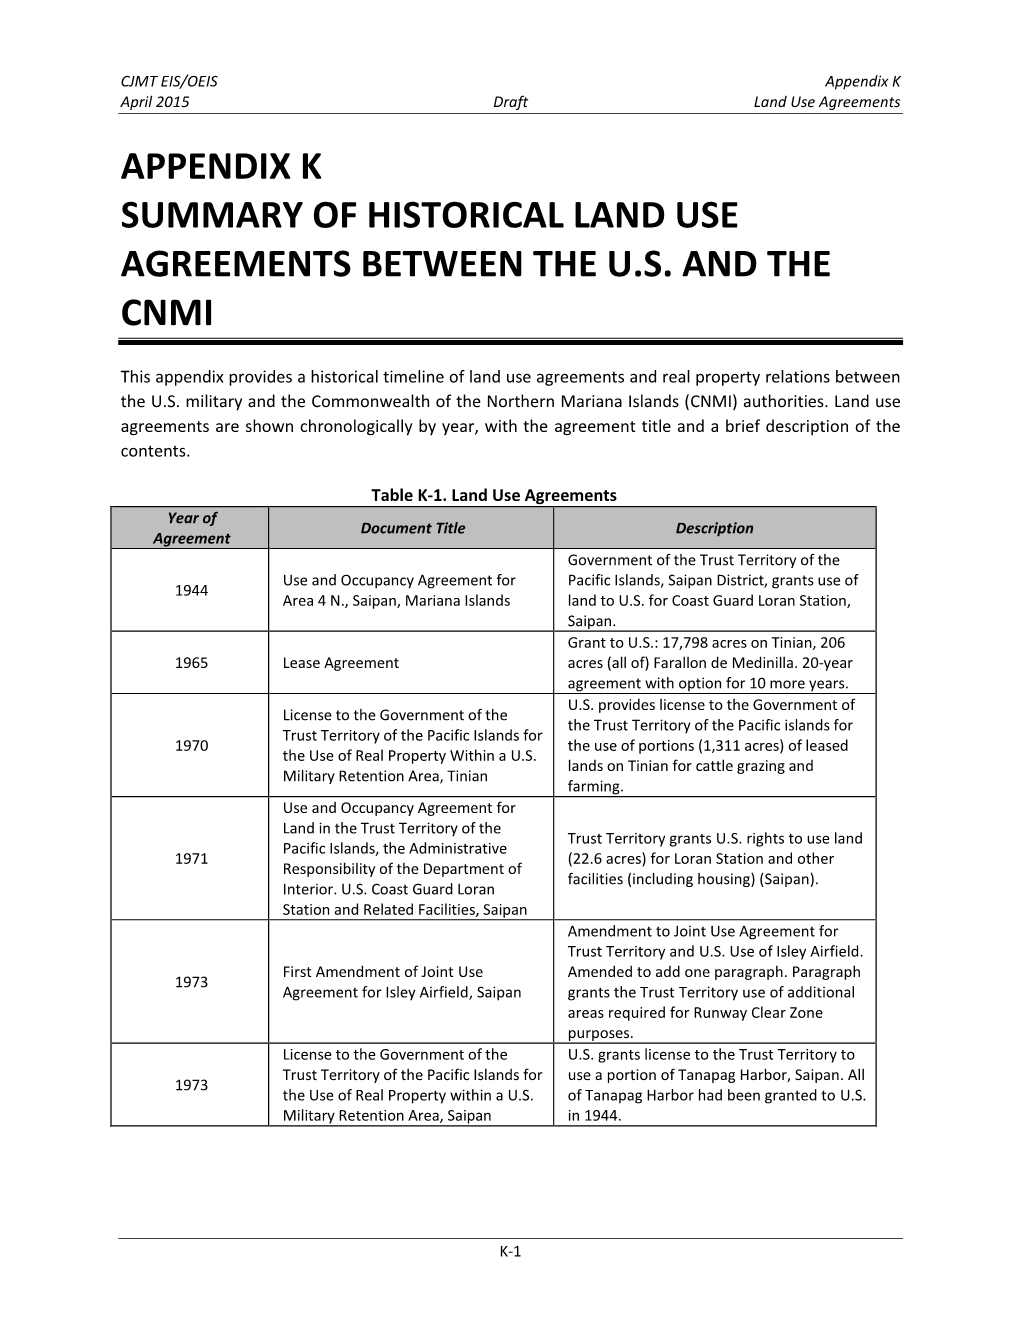 Land Use Agreements APPENDIX K SUMMARY of HISTORICAL LAND USE AGREEMENTS BETWEEN the U.S